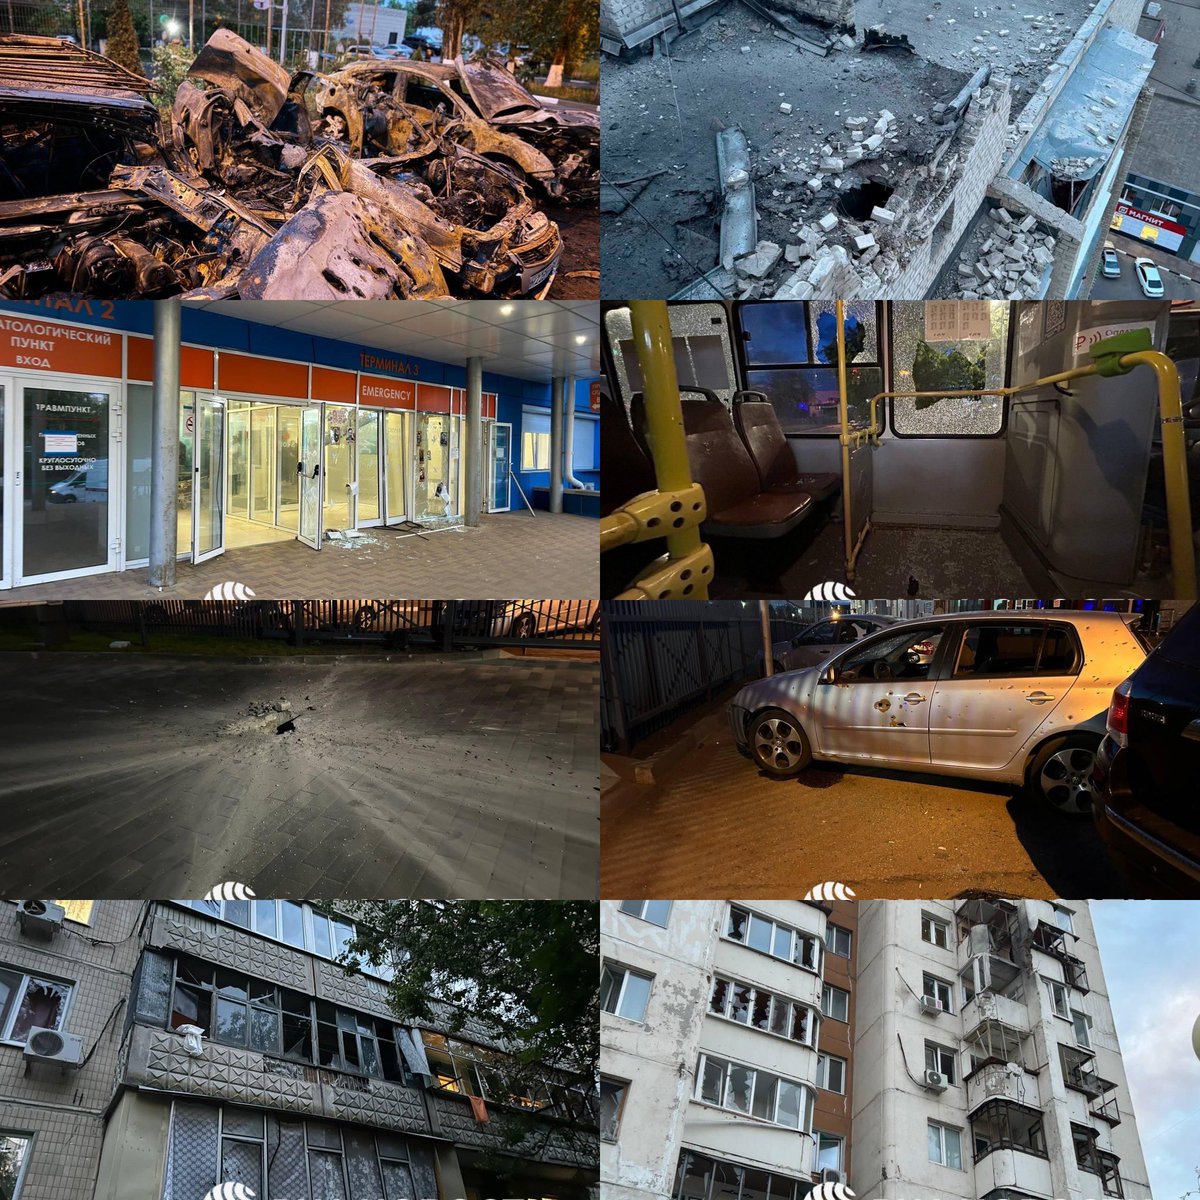 Ukrainian militants conduct mass shelling off Russia’s Belgorod, 28 injured and one dead RIA Novosti writes that 49 apartments in 22 buildings, a city hospital, a children’s clinic, a center for gymnastics, and a school were all hit by the sporadic shelling.